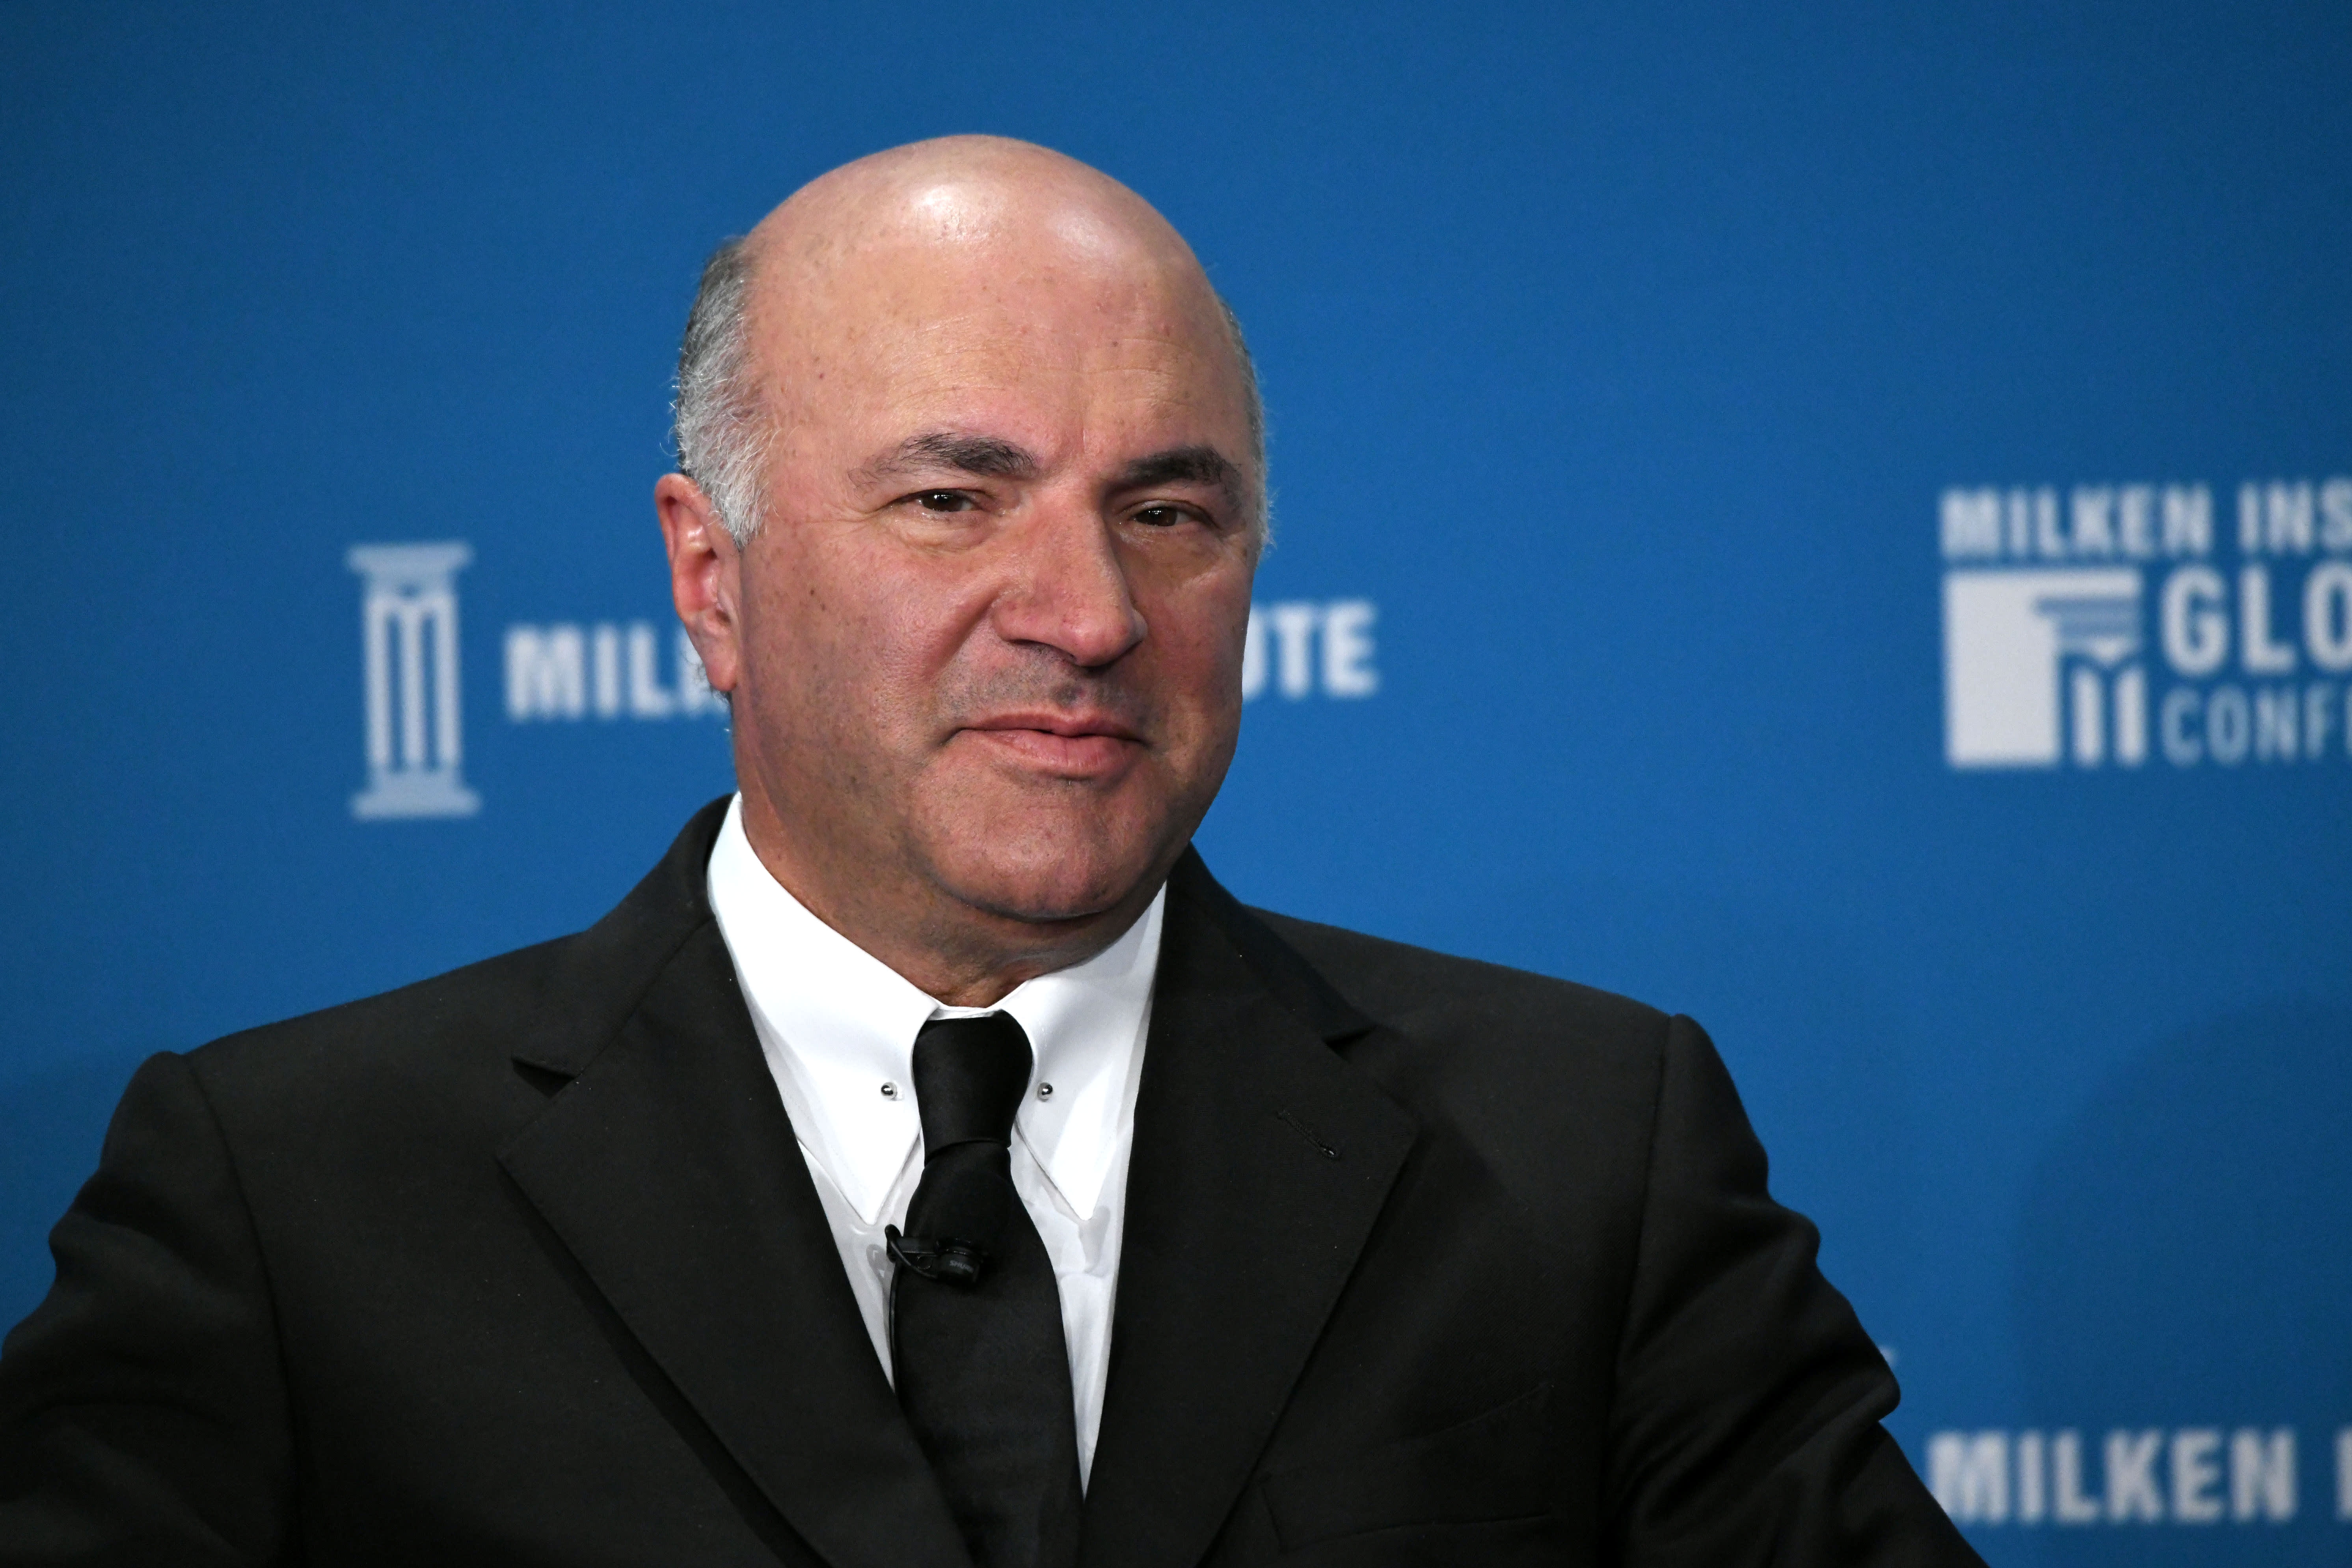 Kevin O’Leary says he wants to more than double crypto holdings to 7%